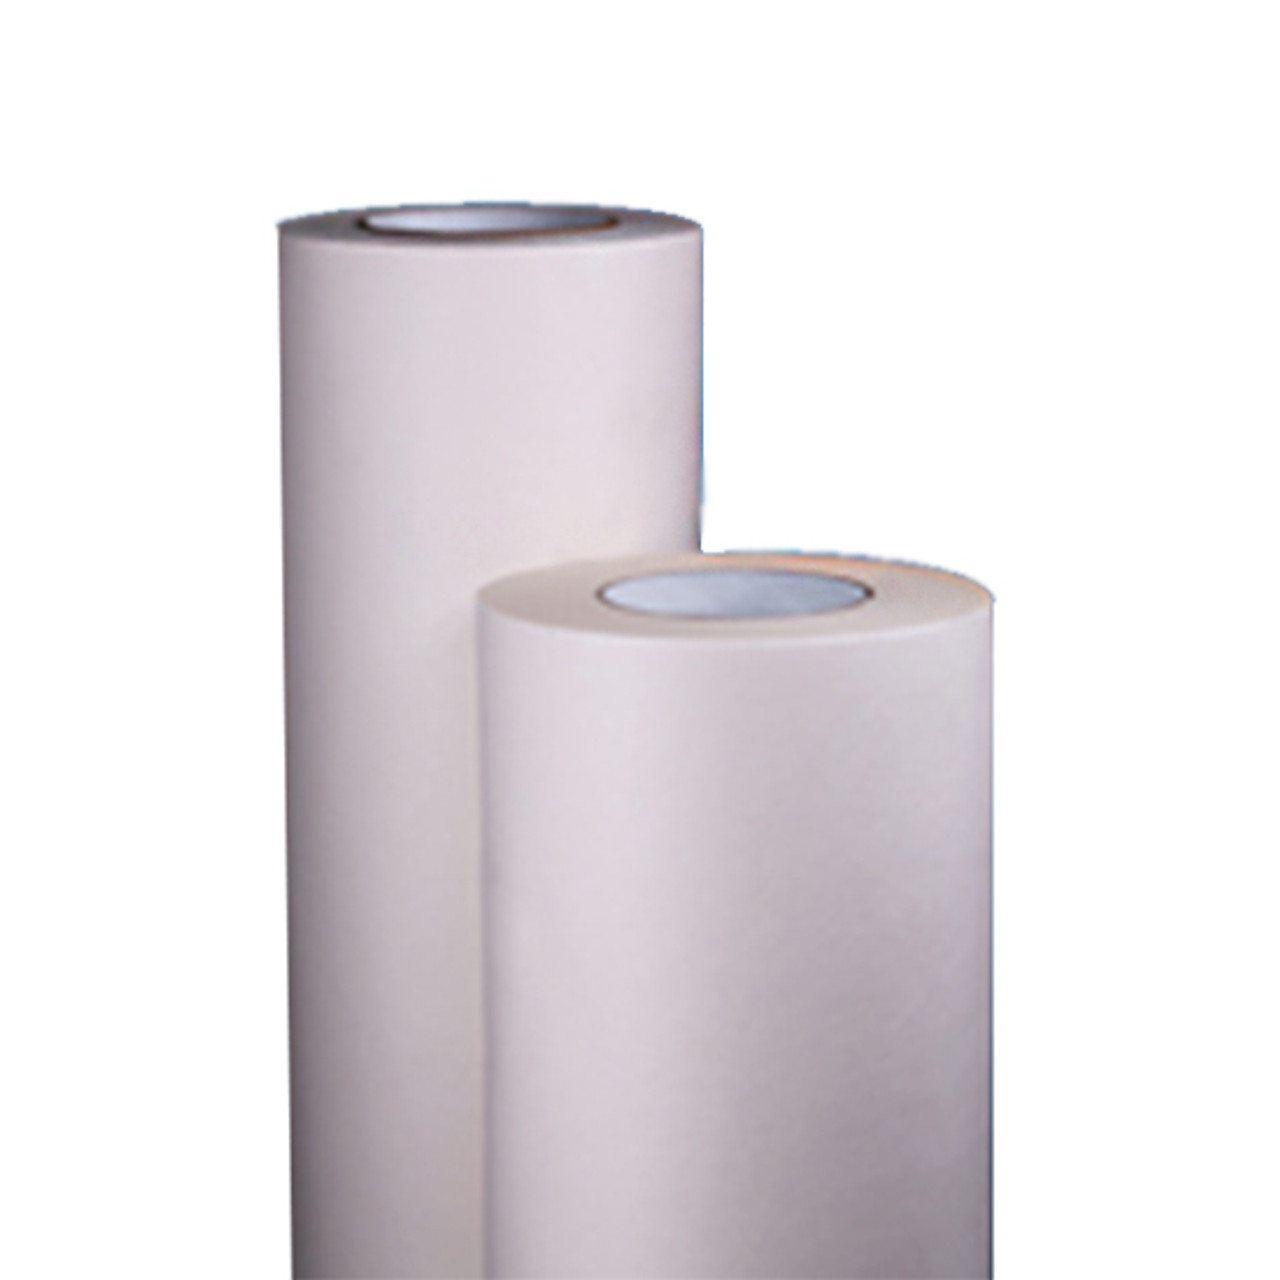 24 inch x 100 Yard Roll of Vinyl Transfer Tape Paper with Layflat Adhesive